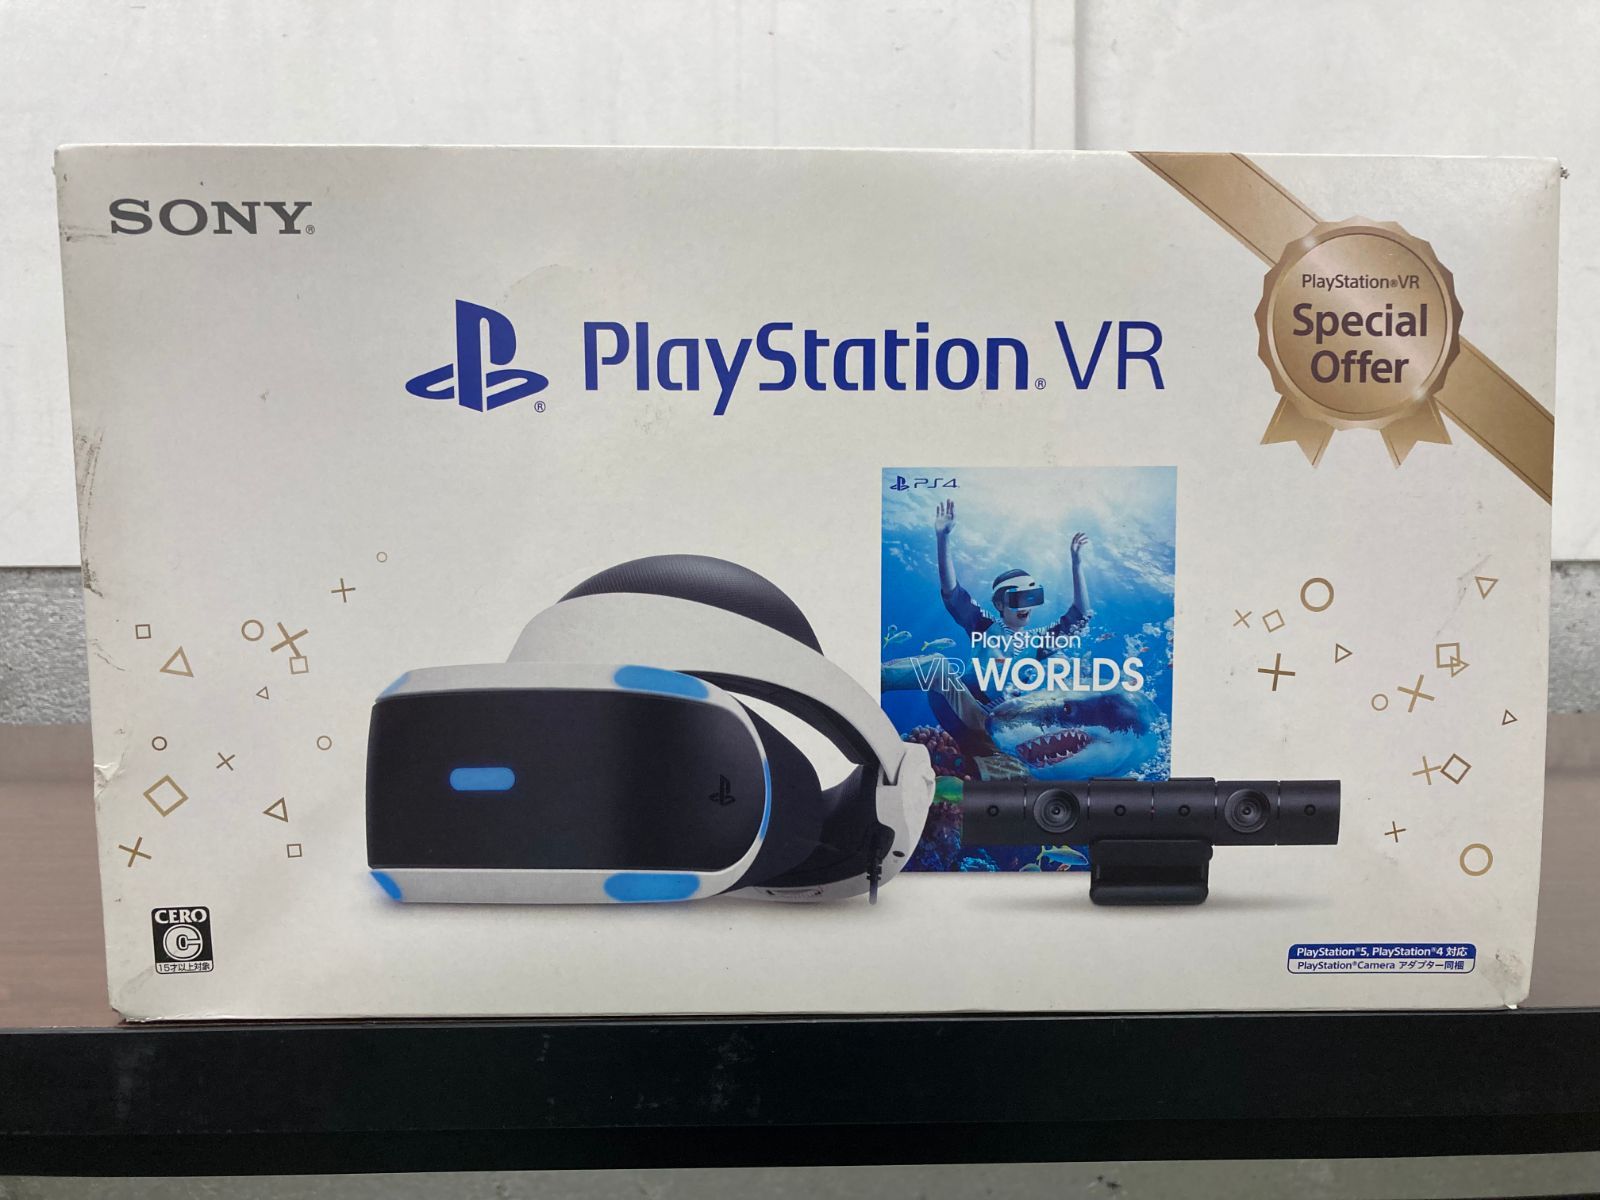 PlayStation VR Special Offer ＋ソフト - 家庭用ゲーム本体